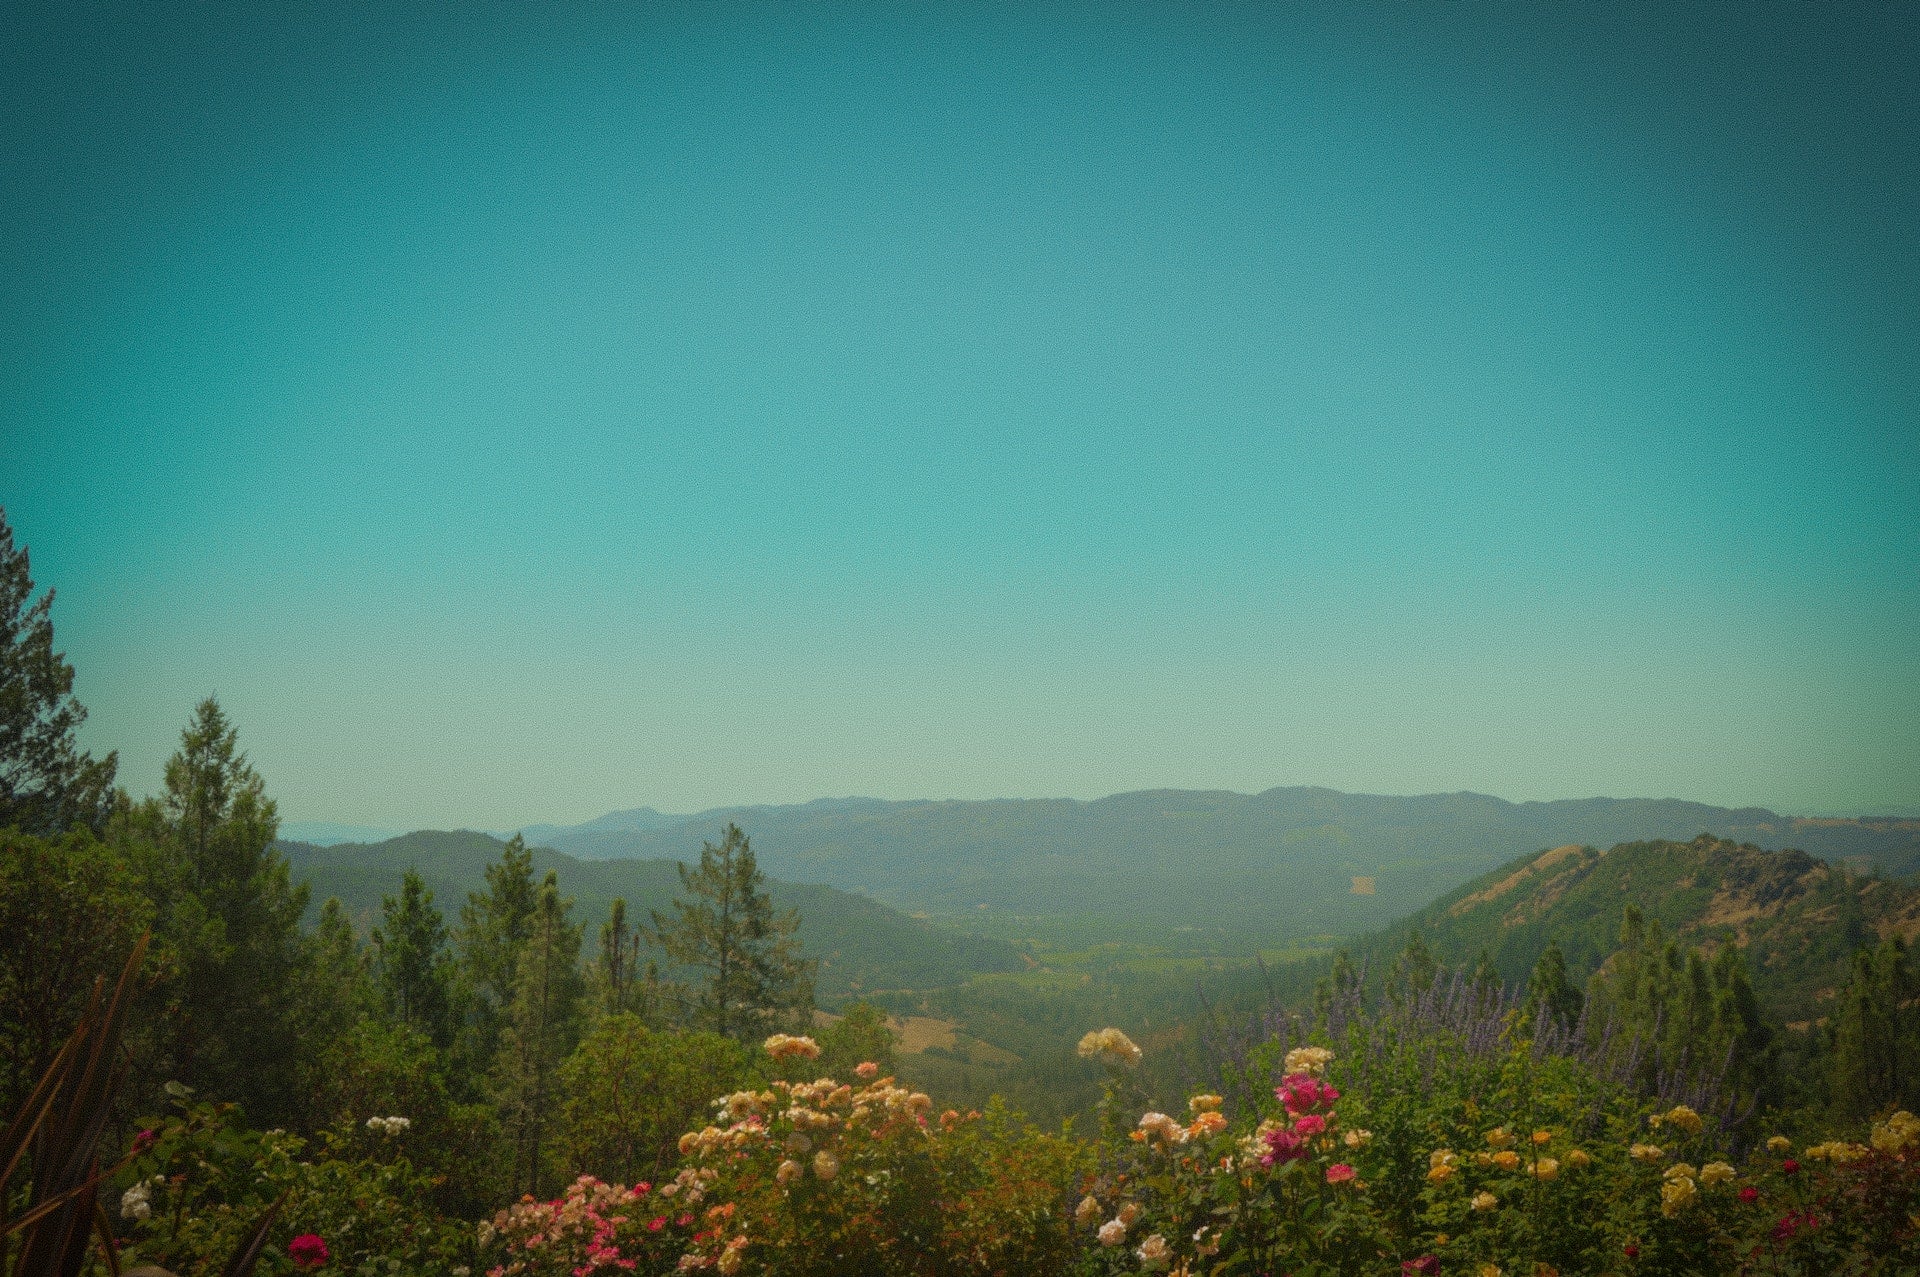 view of mountains and flowers in calistoga california